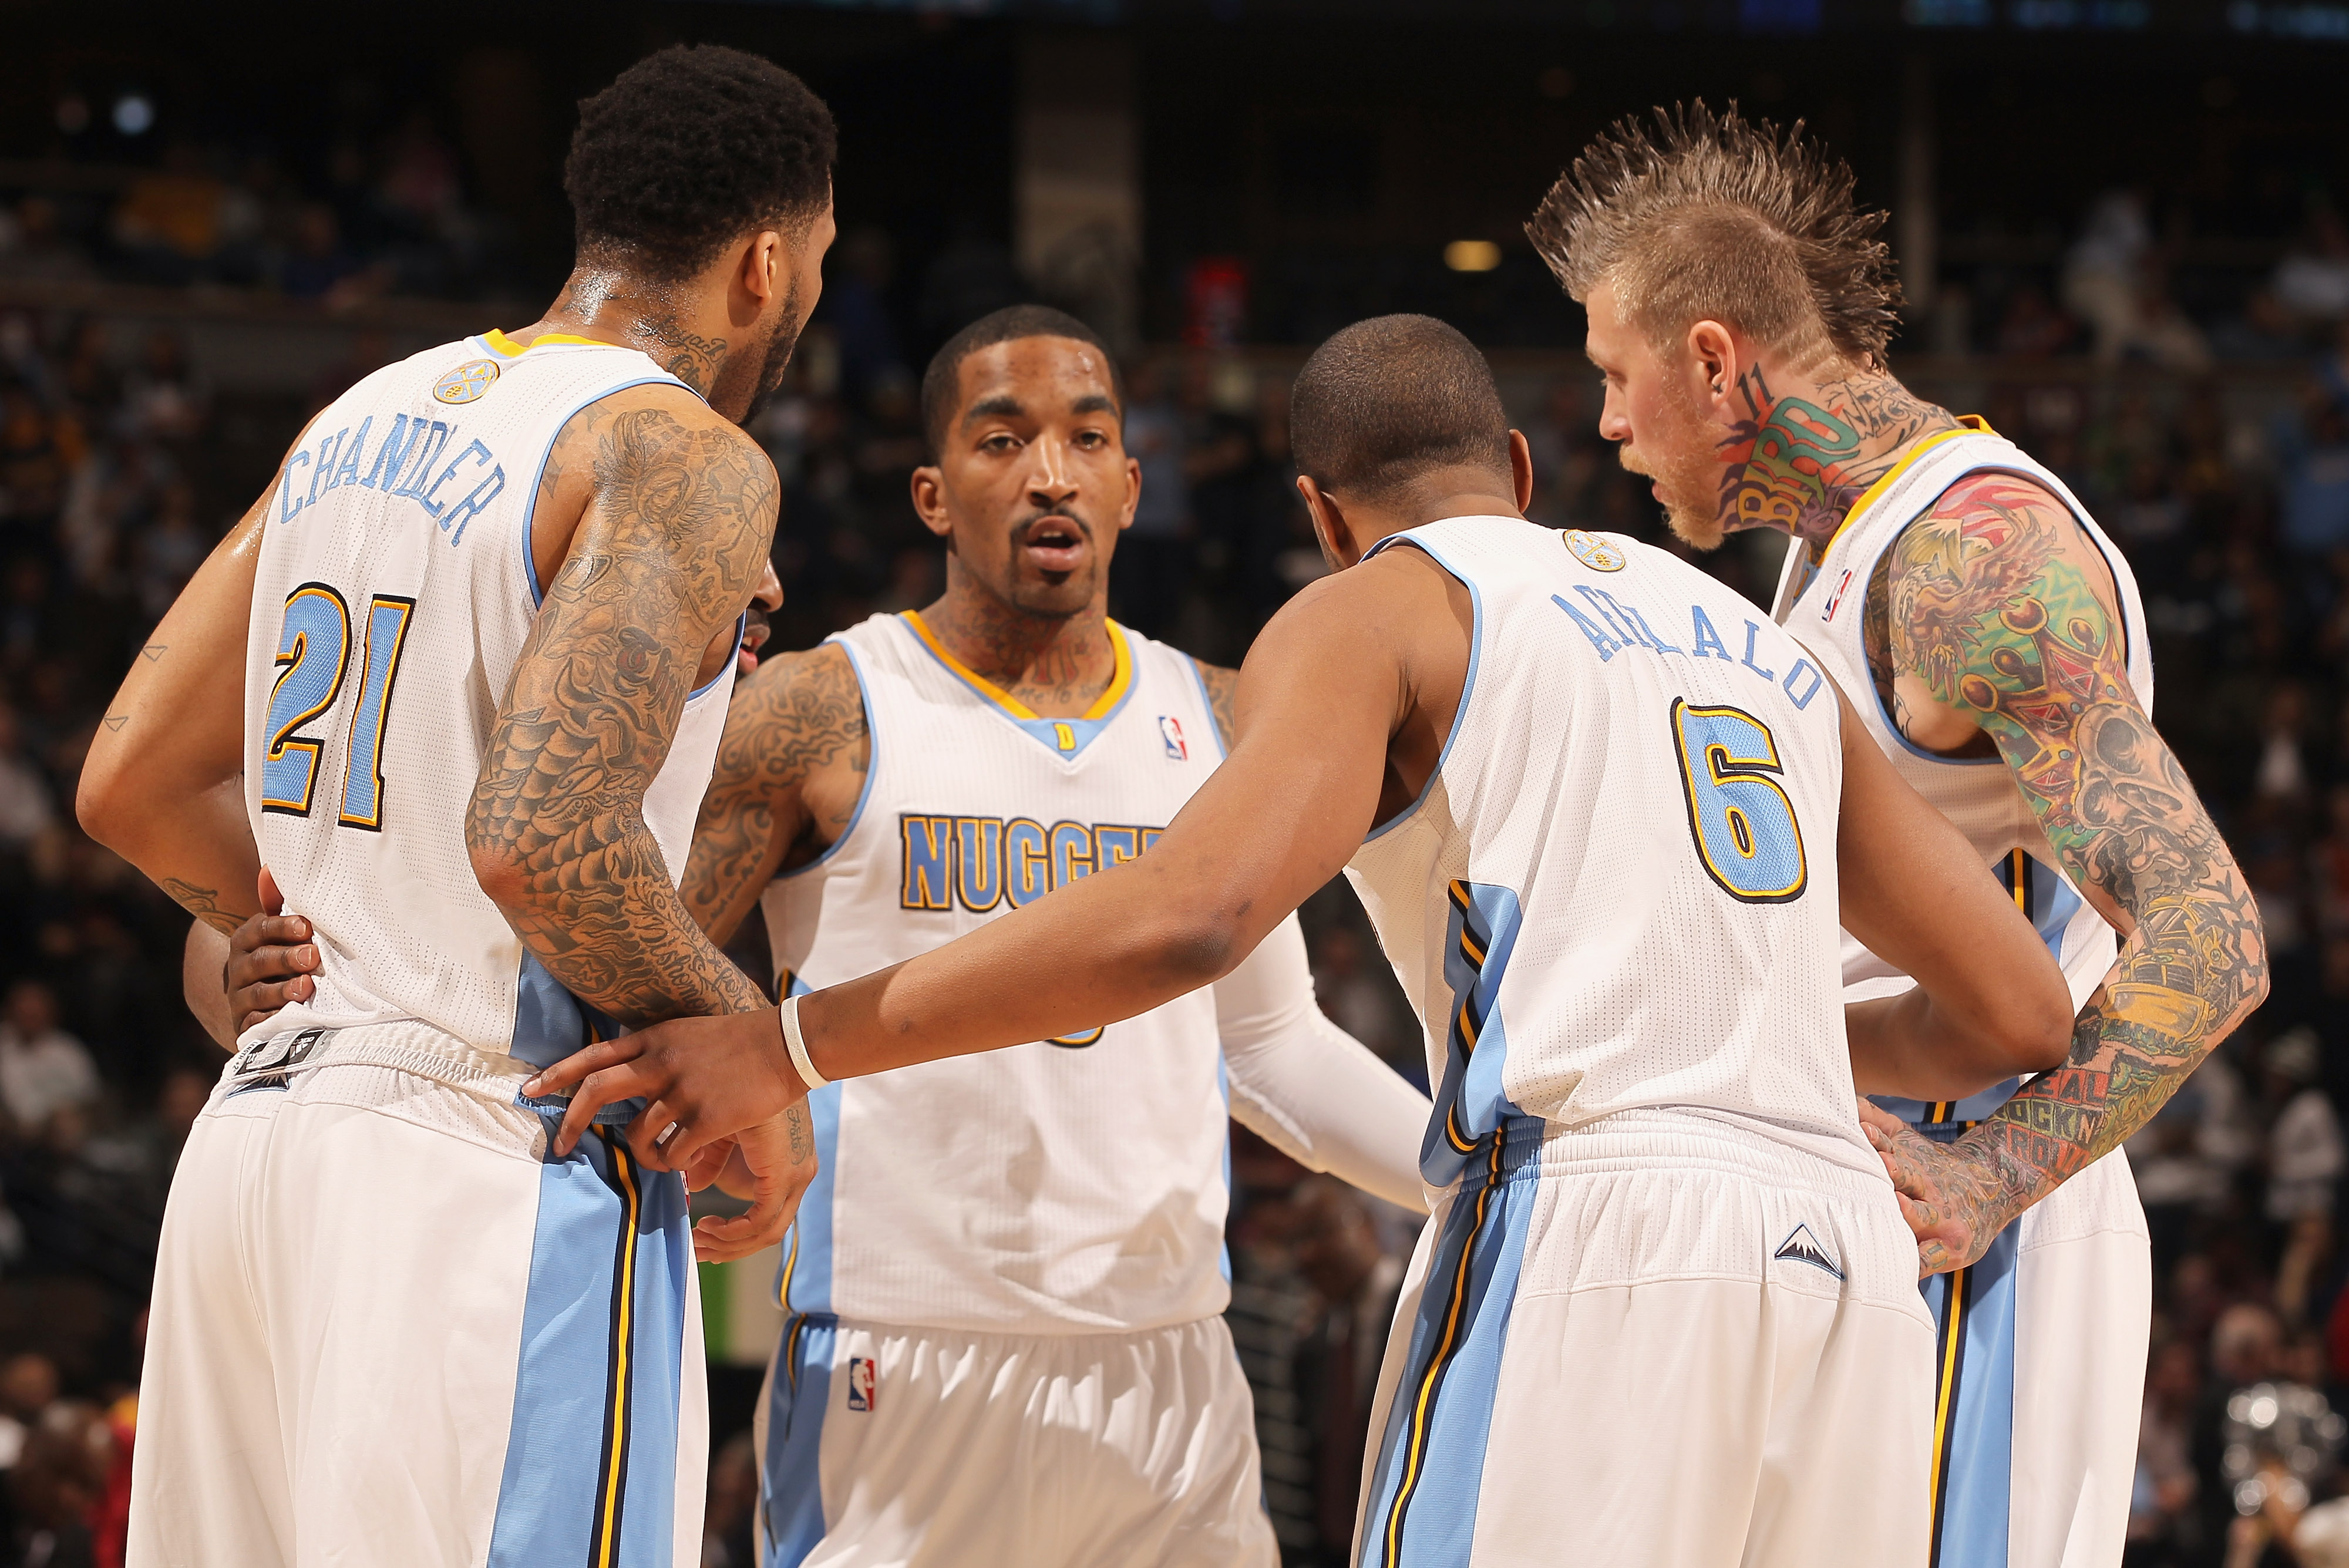 DENVER, CO - FEBRUARY 28:  (L-R) Wilson Chandler #21, Raymond Felton #20 (hidden), J.R. Smith #5, Arron Afflalo #6 and Chris Andersen #11 of the Denver Nuggets huddle up against the Atlanta Hawks during NBA action at the Pepsi Center on February 28, 2011